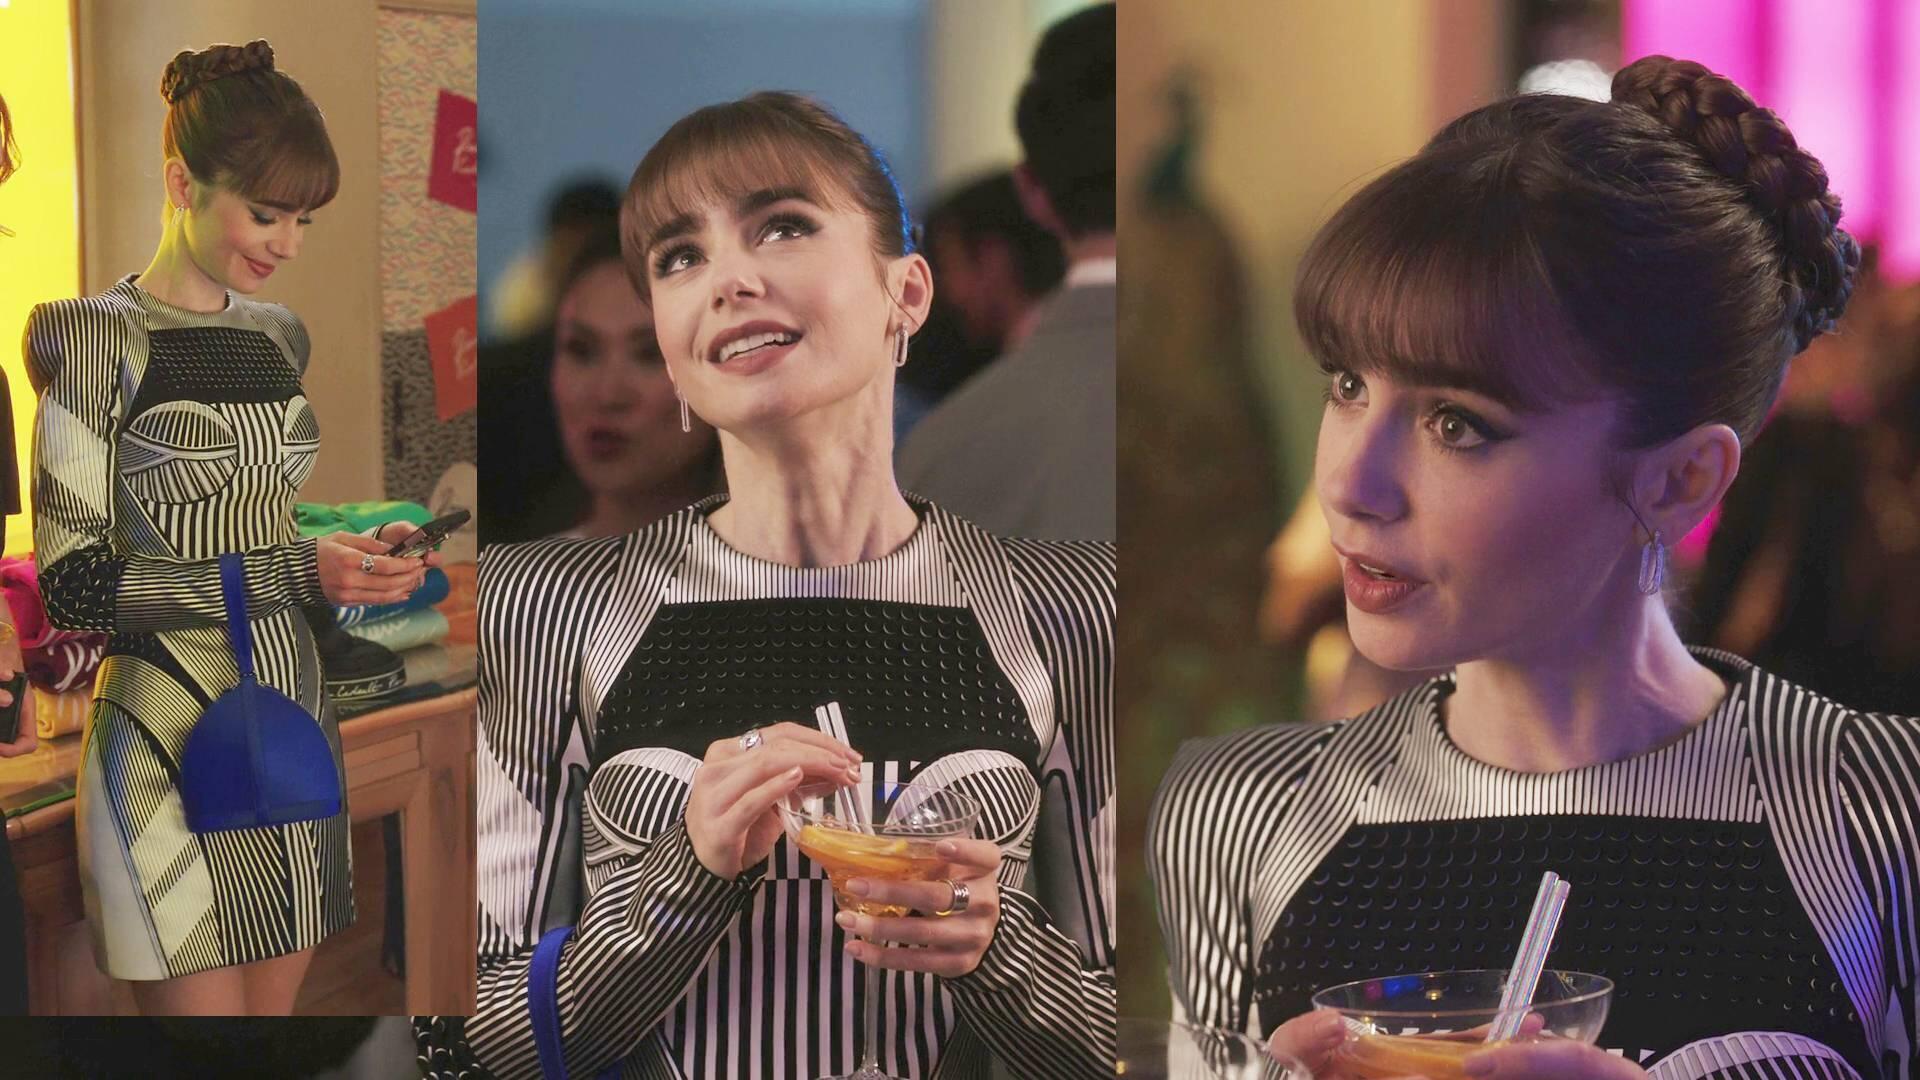 Lily Collins - Emily In Paris | Season 3 Episode 8 | Lily Collins style